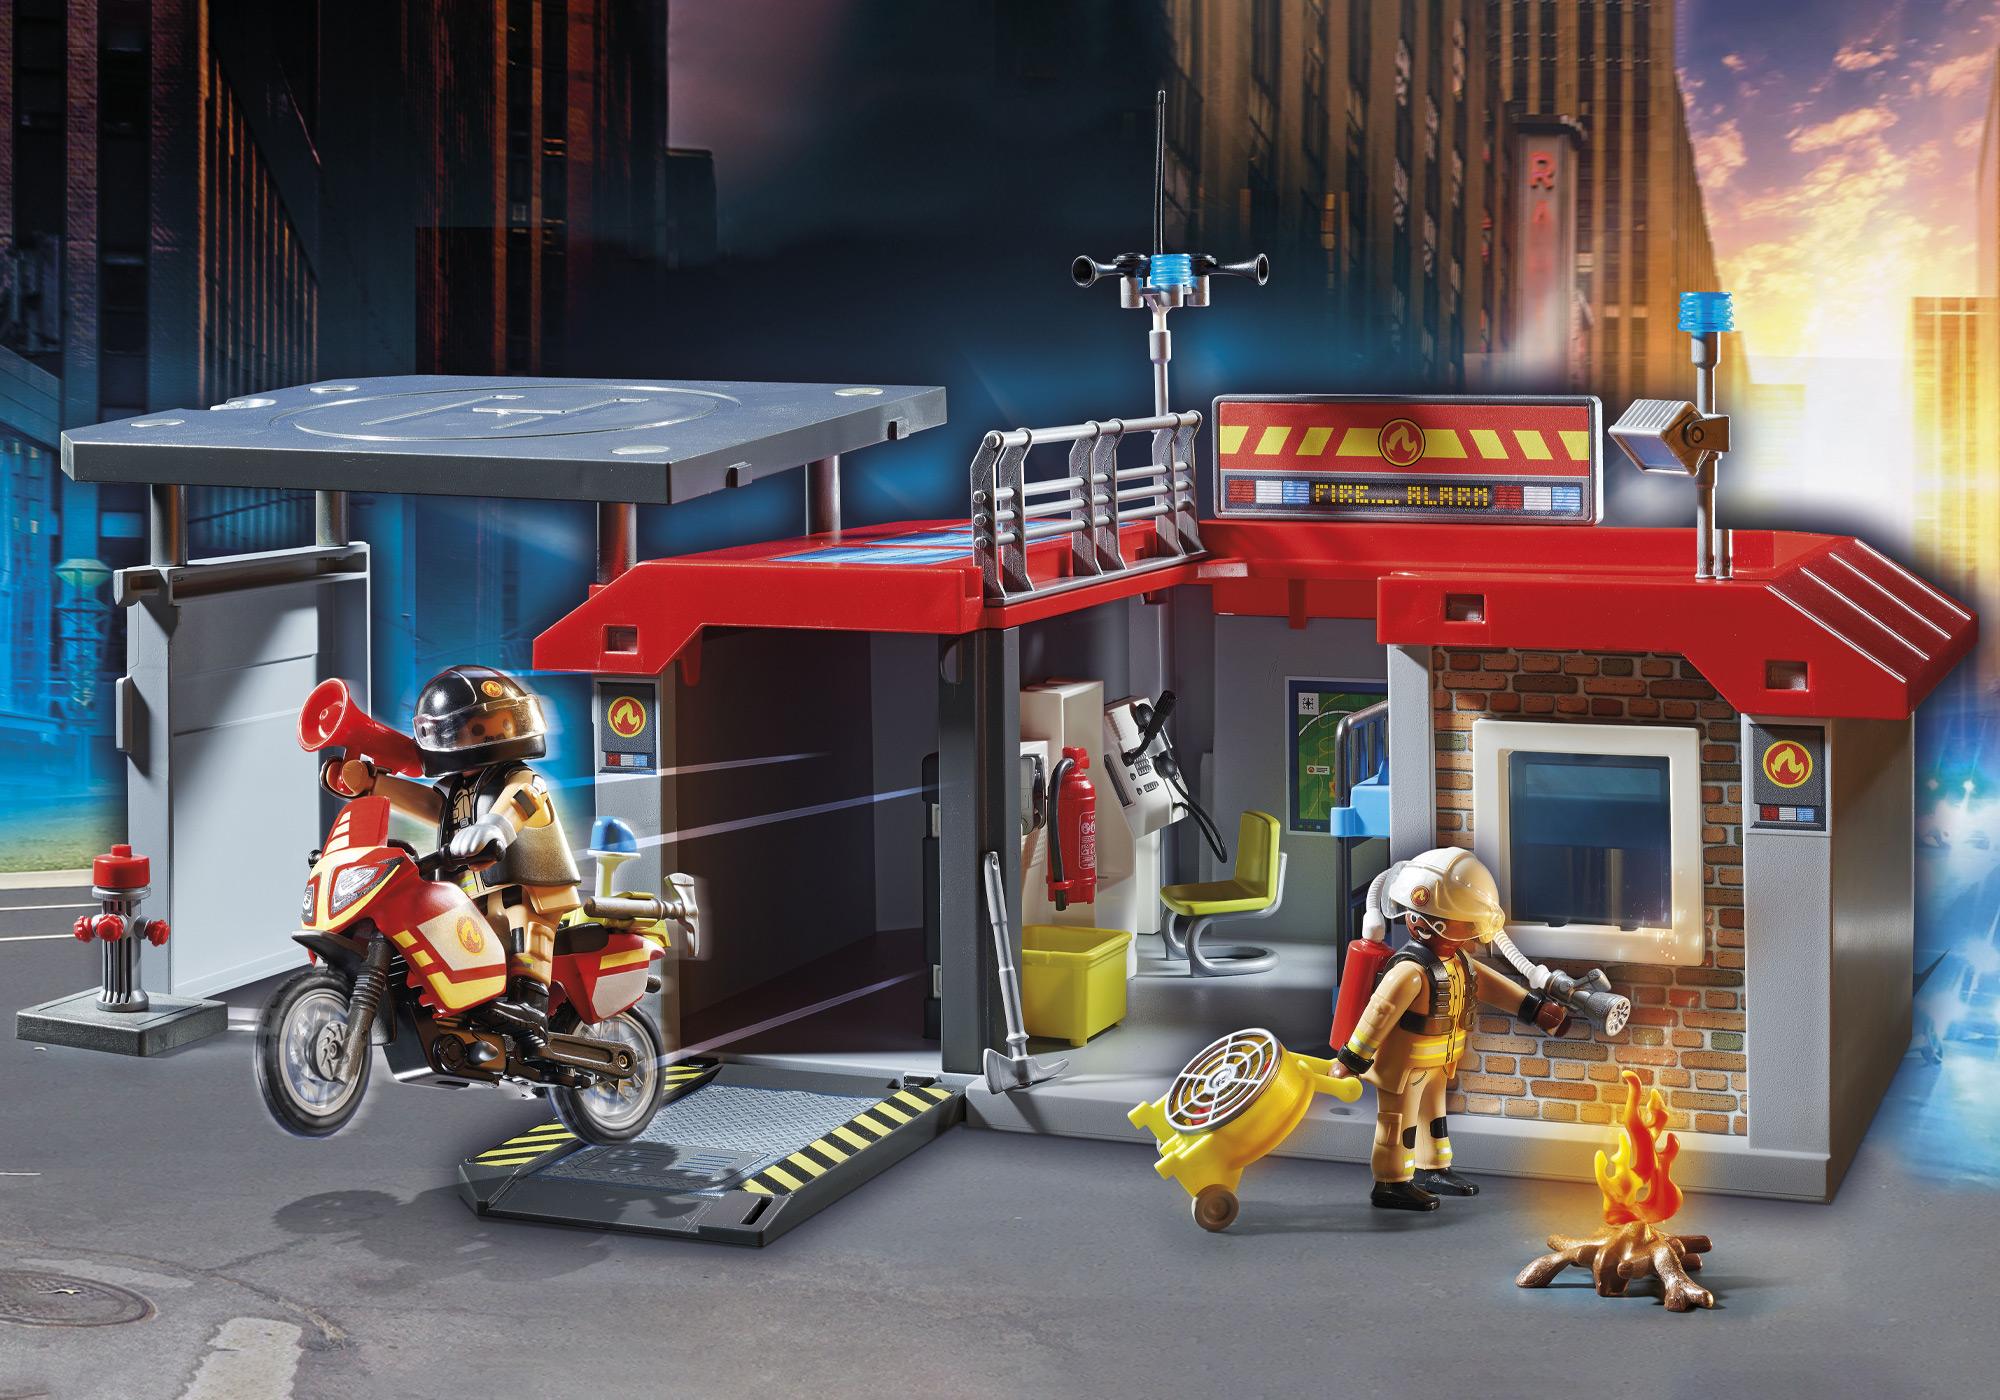 Playmobil Ghostbusters Fire House Headquarters Play Set